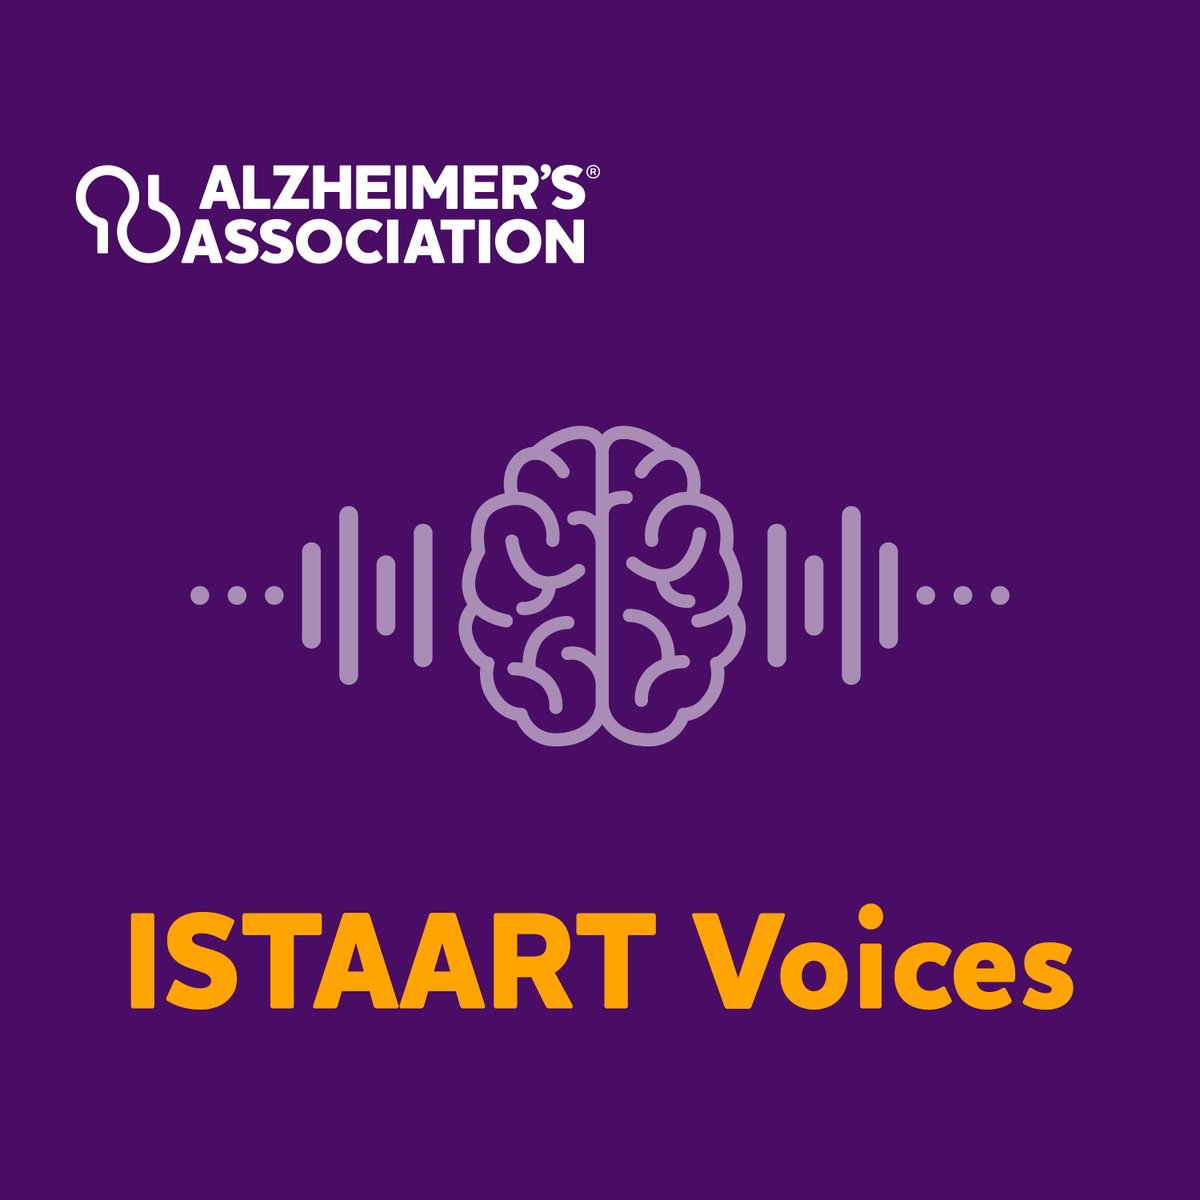 🎙️ New ISTAART Voices episode is out now! In this episode, @ccrugom dives into the genetics of Alzheimer's and Down syndrome. Subscribe now for the latest in dementia science & tune in every other Wednesday till #AAIC24 at alz.org/ISTAARTpodcasts @alzdemjournals @alzassociation